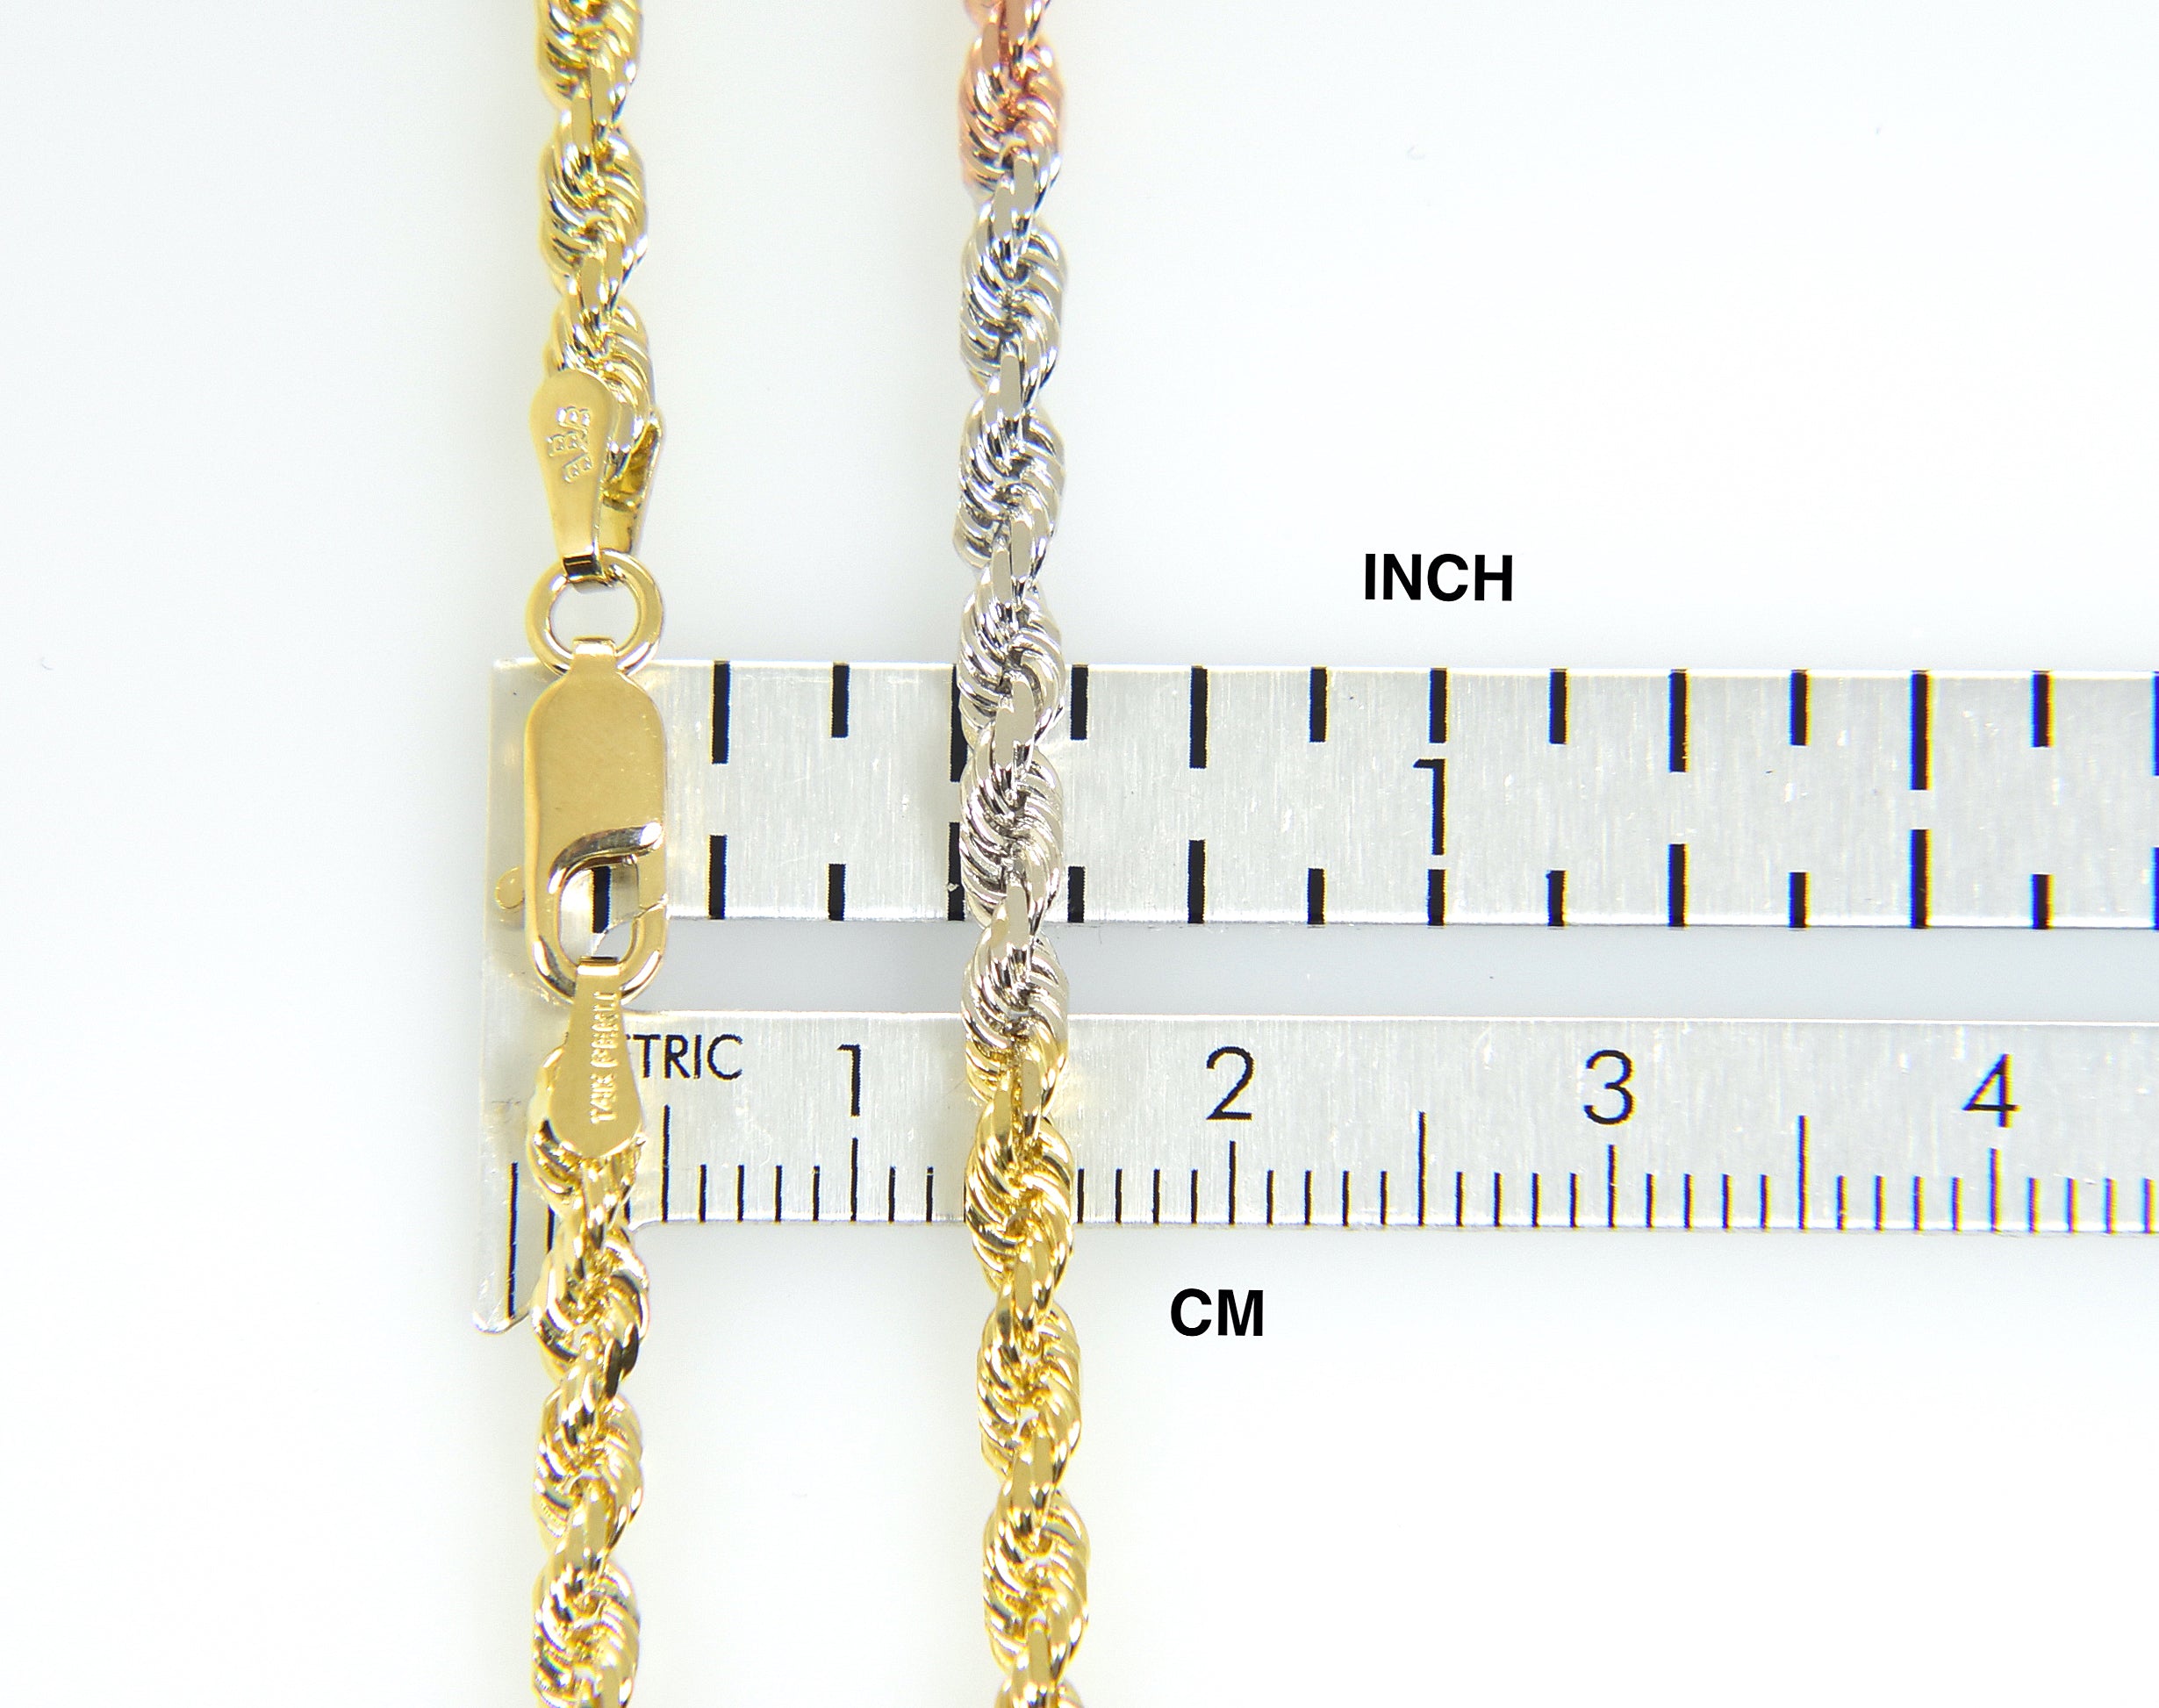 14K Yellow White Rose Gold Tri Color 3mm Diamond Cut Rope Bracelet Anklet Choker Necklace Chain